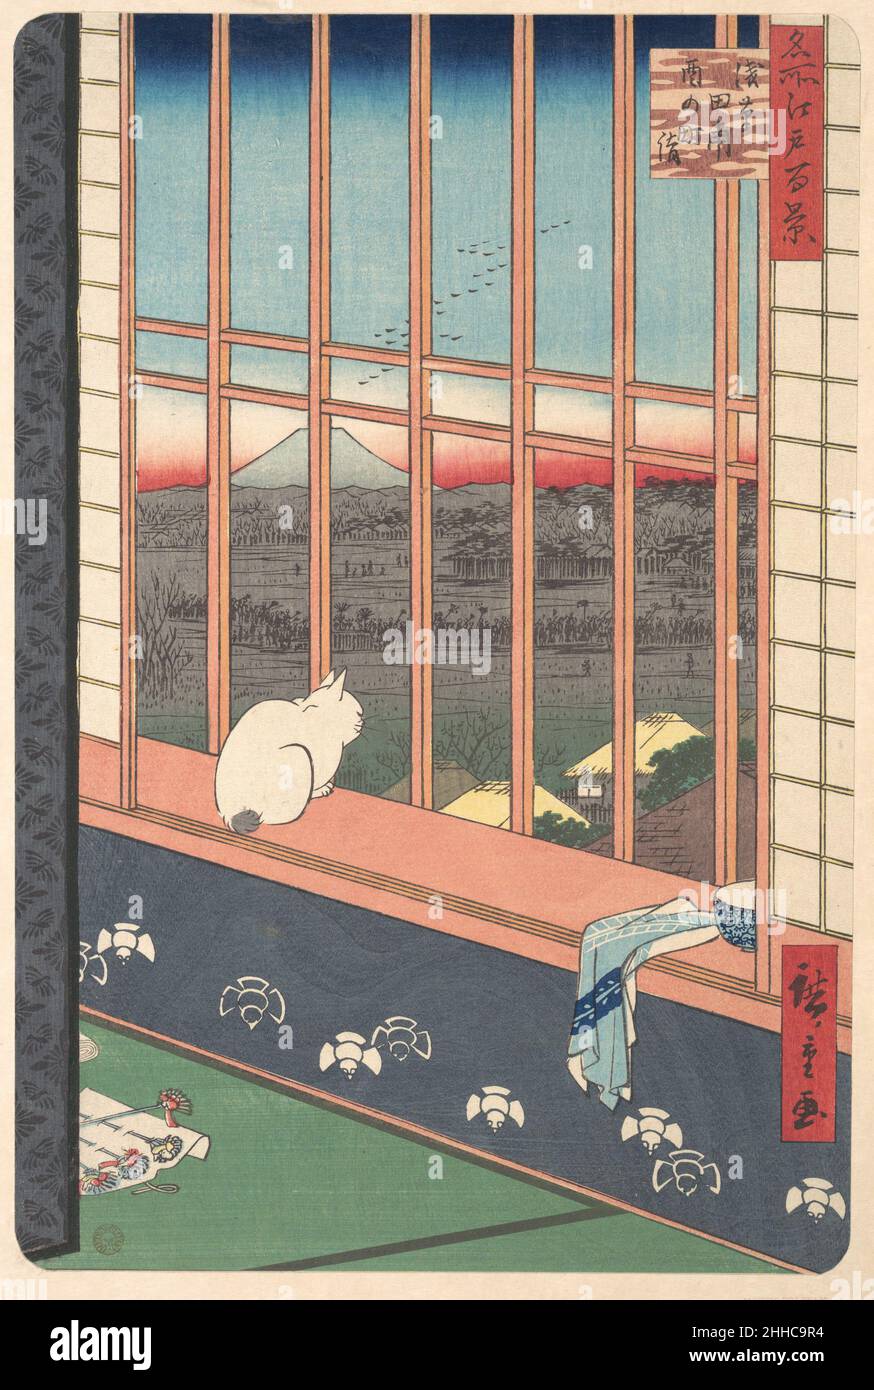 Revelers Returned from the Tori no Machi Festival at Asakusa, from the series One Hundred Famous Views of Edo 1857 Utagawa Hiroshige Japanese The inscription on this print tells us that the scene is located in Asakusa Tammbo, a famous gay quarter located in the eastern part of Edo. One can therefore surmise that this is one of the geisha houses for which Asakusa Tammbo was known. Perhaps the hostess and her guest are on the other side of he folding screen, which stands on the left side of the composition. Since the ceramic bowl and towel appear to have been set out for morning washing and brus Stock Photo